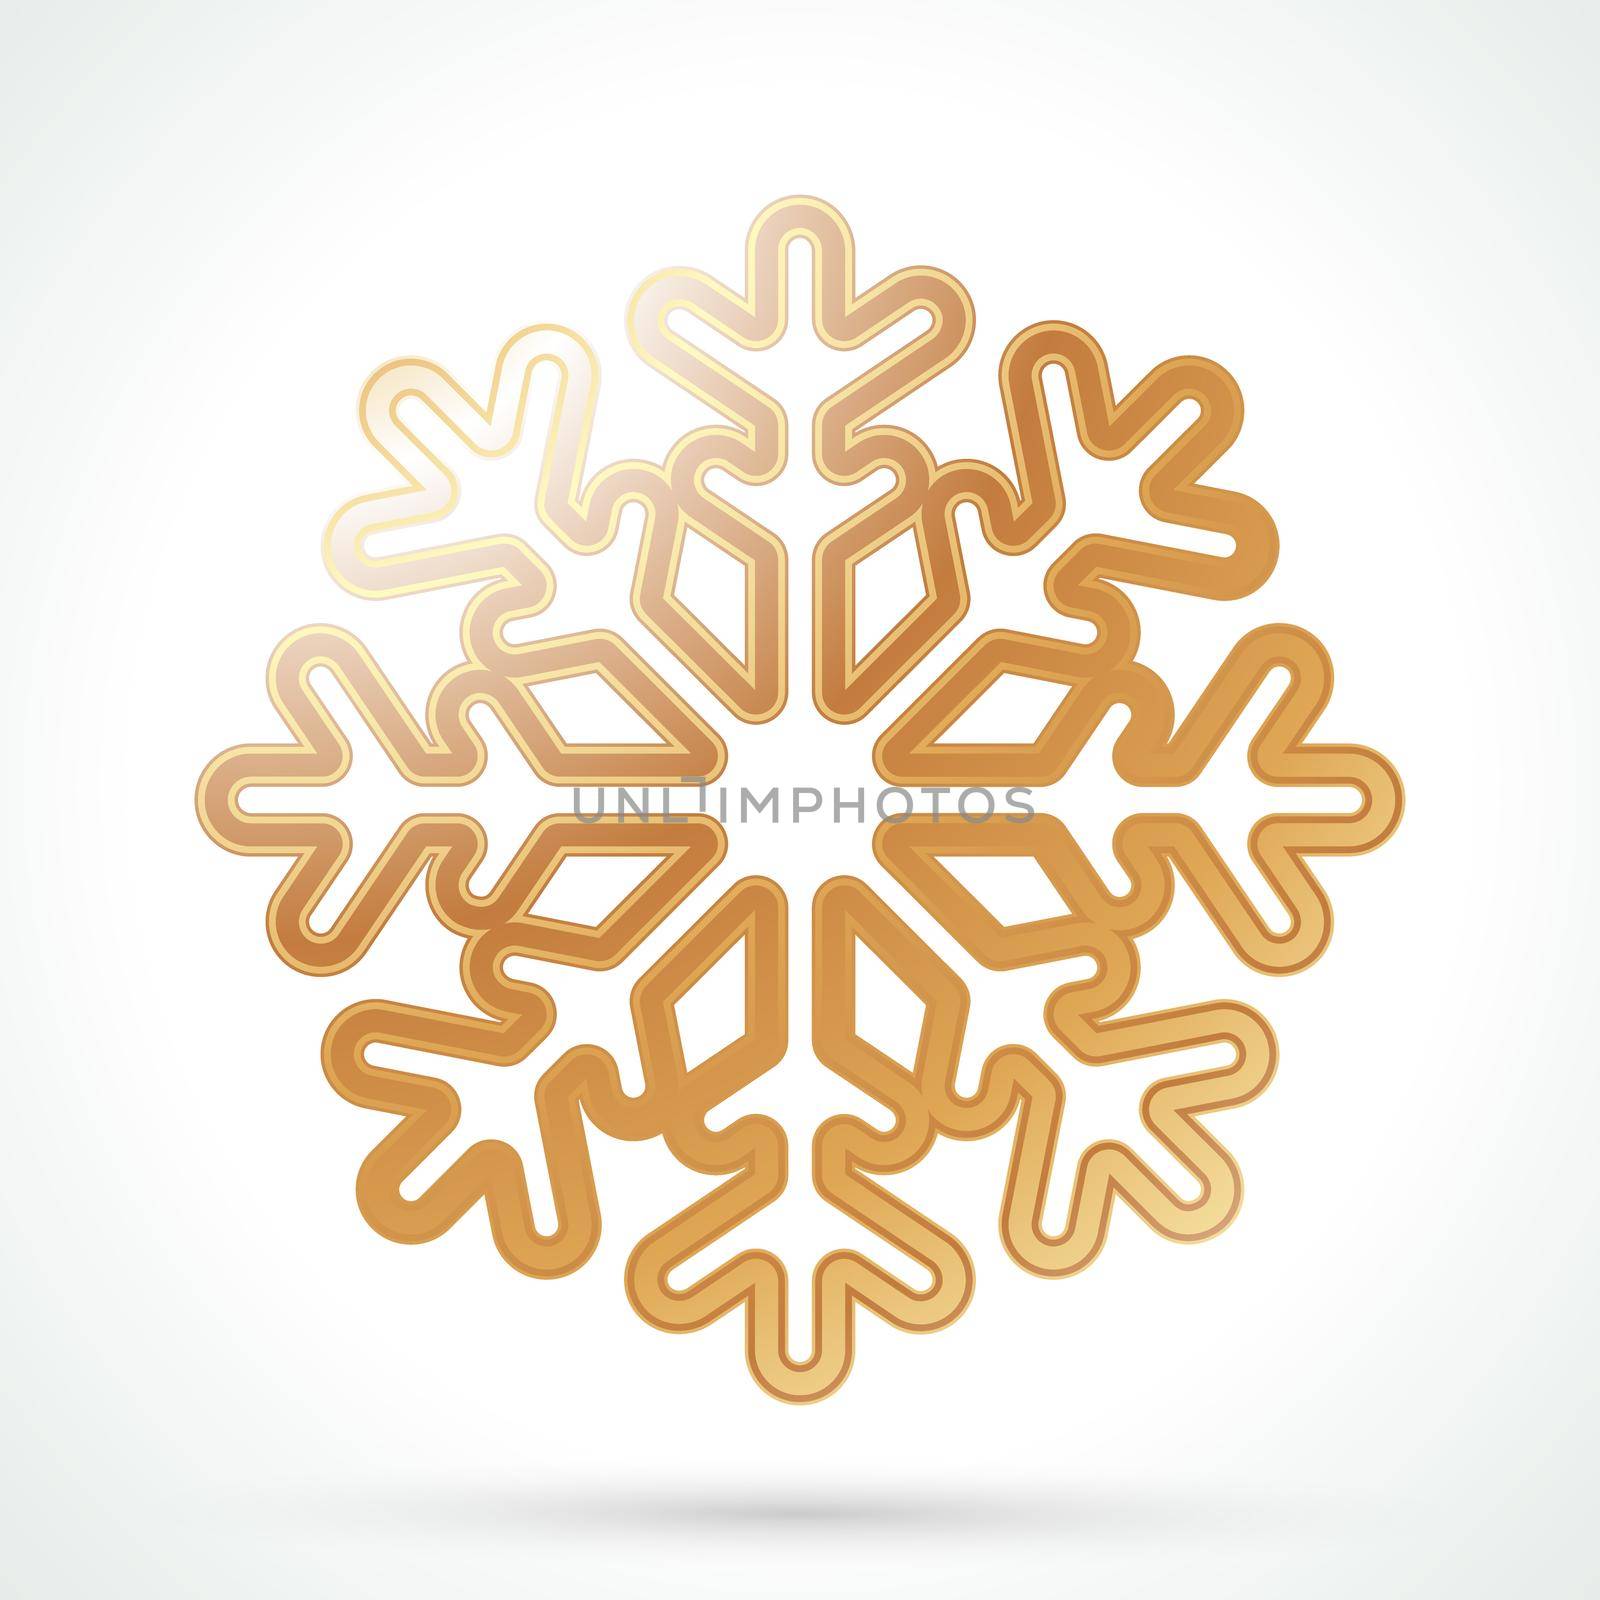 Gold snowflake icon. Abstract winter symbol. Decorative element for brochure, flyer, greeting card. Vector illustration.